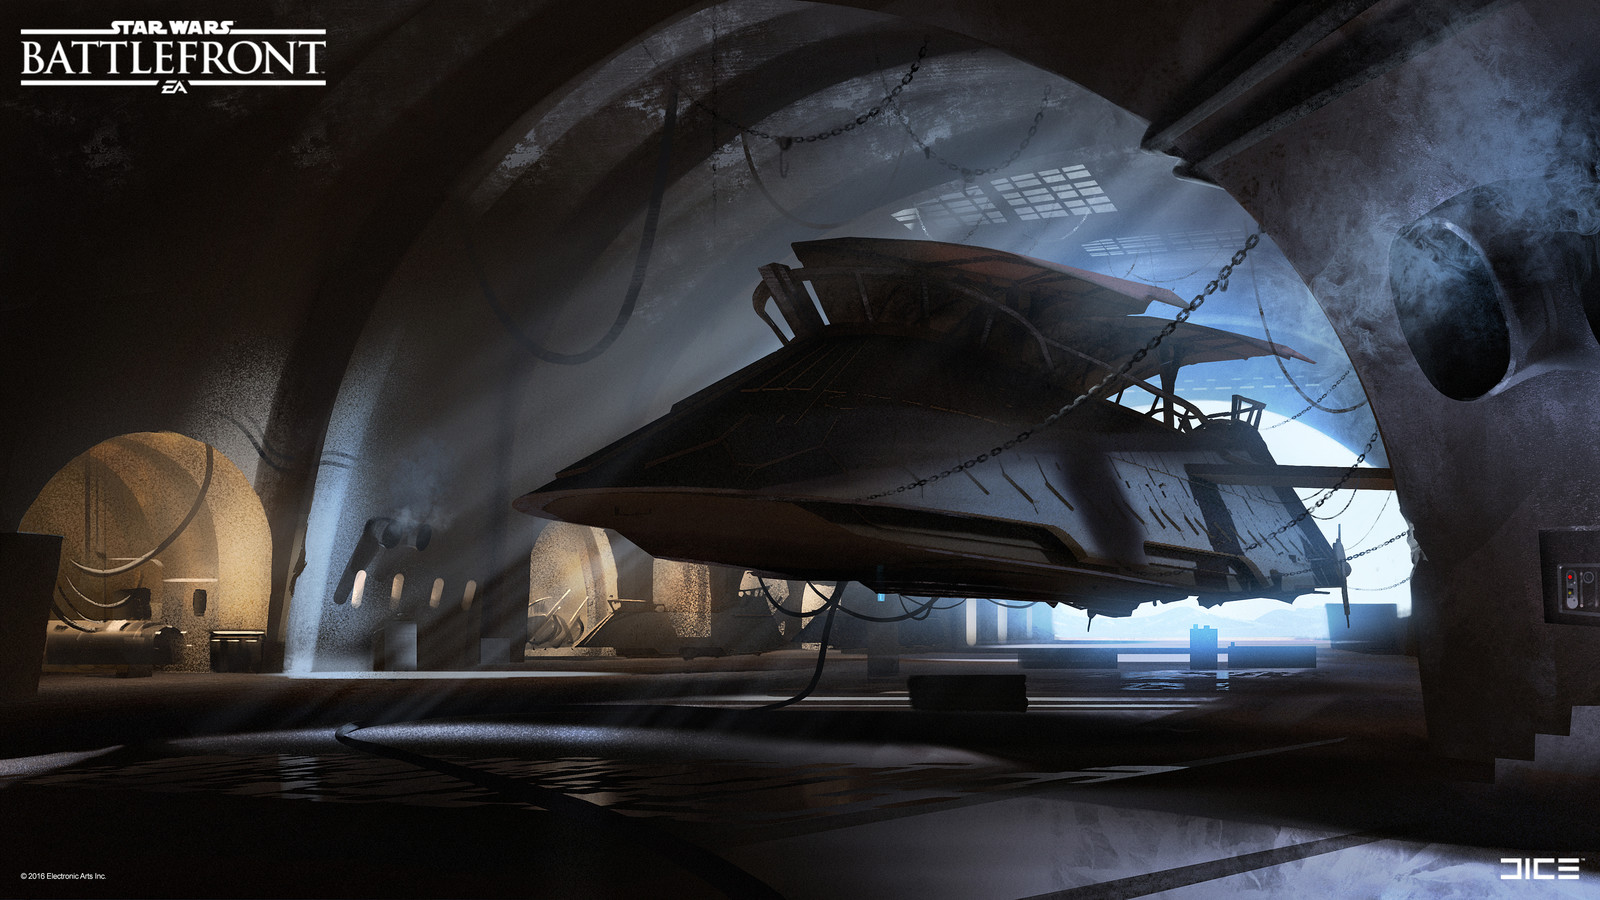 Jabba's Palace Concept Art  for the Star Wars Battlefront Outer Rim DLC. (2015)